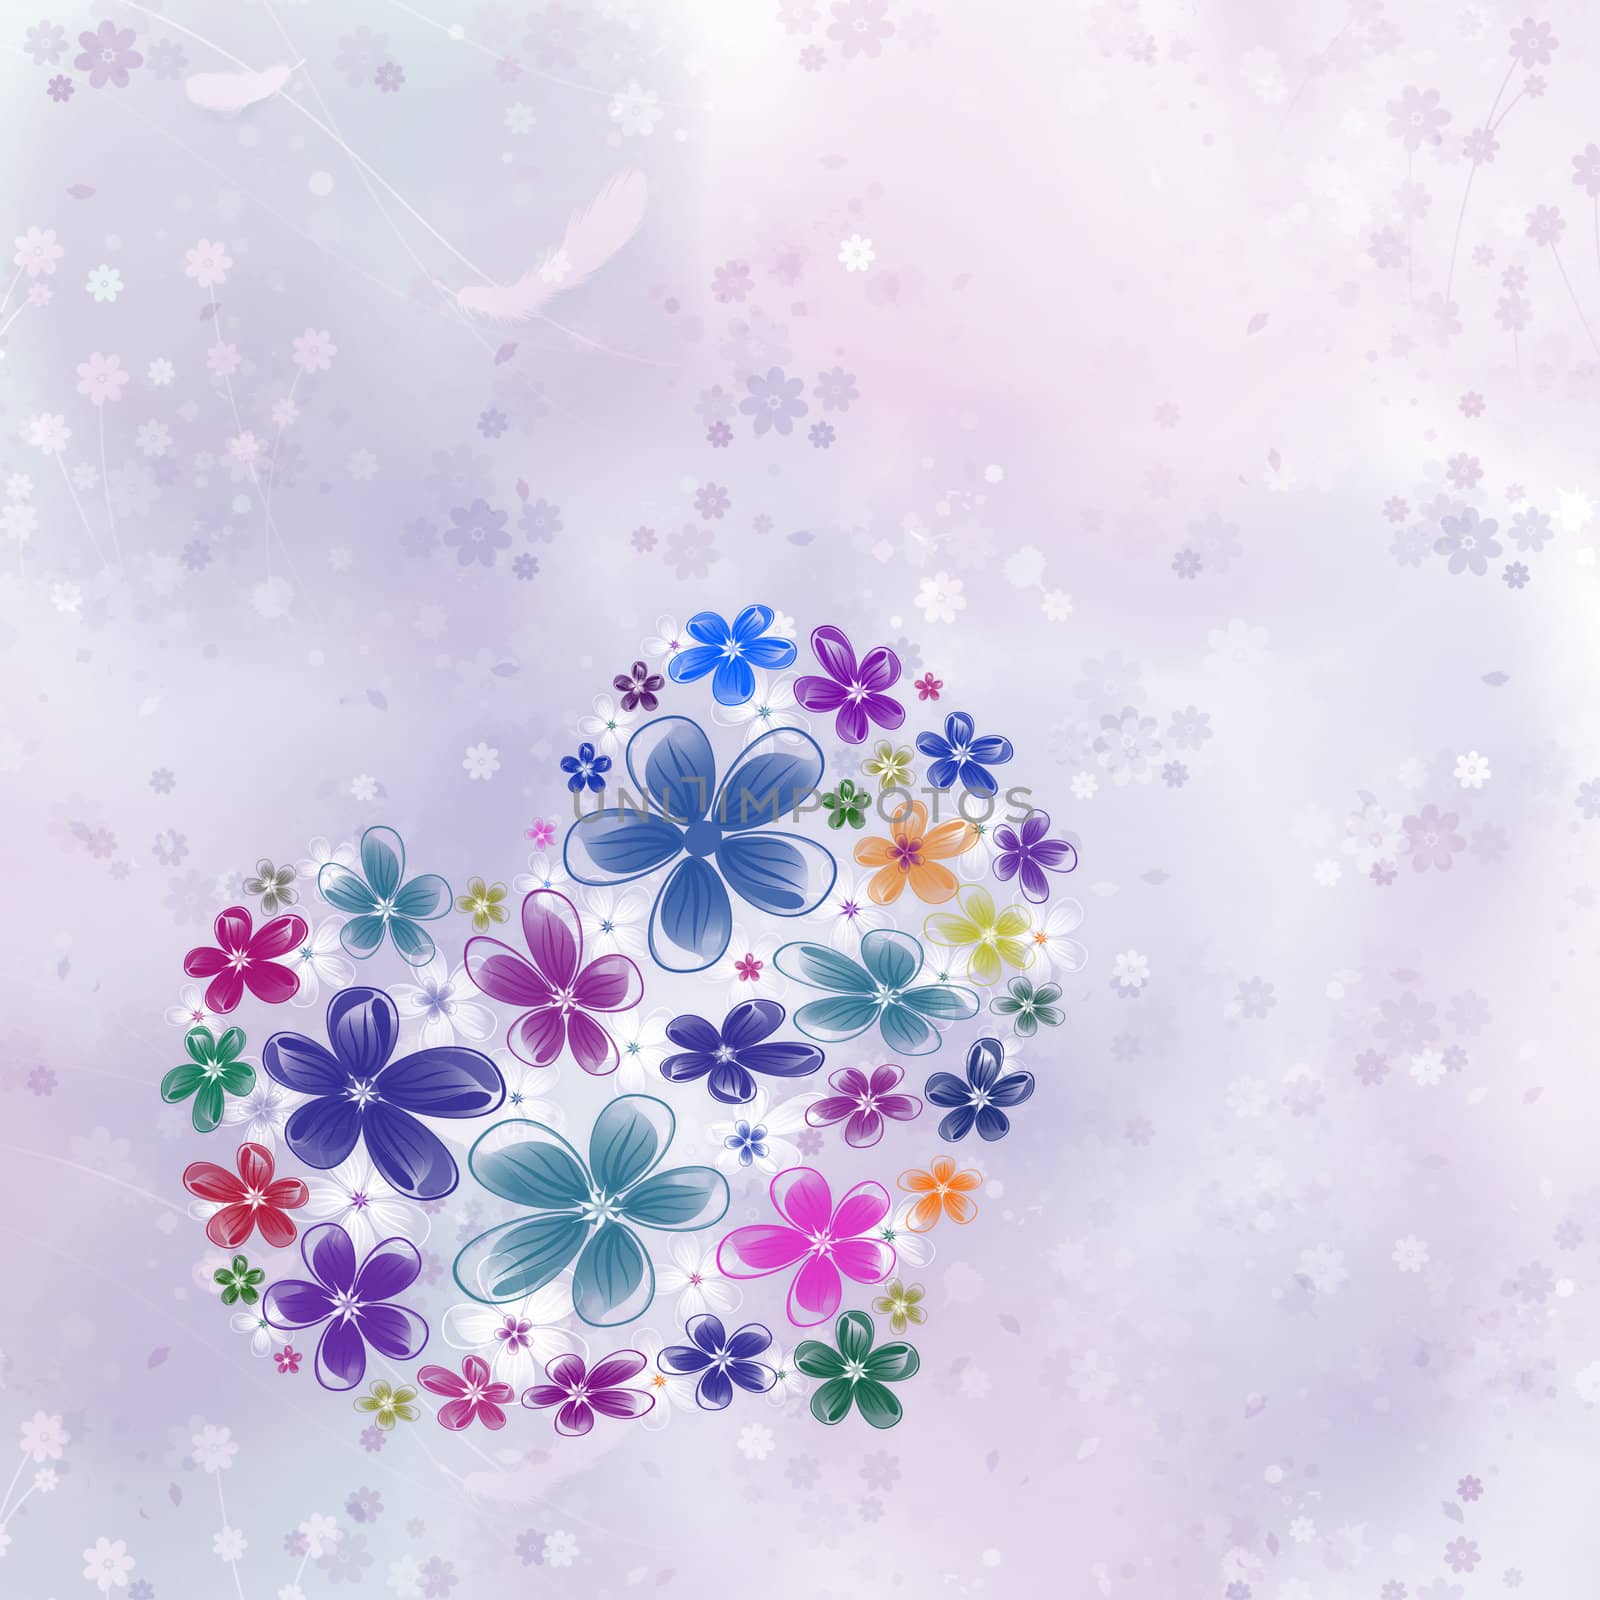 Heart from flowers on a violet background